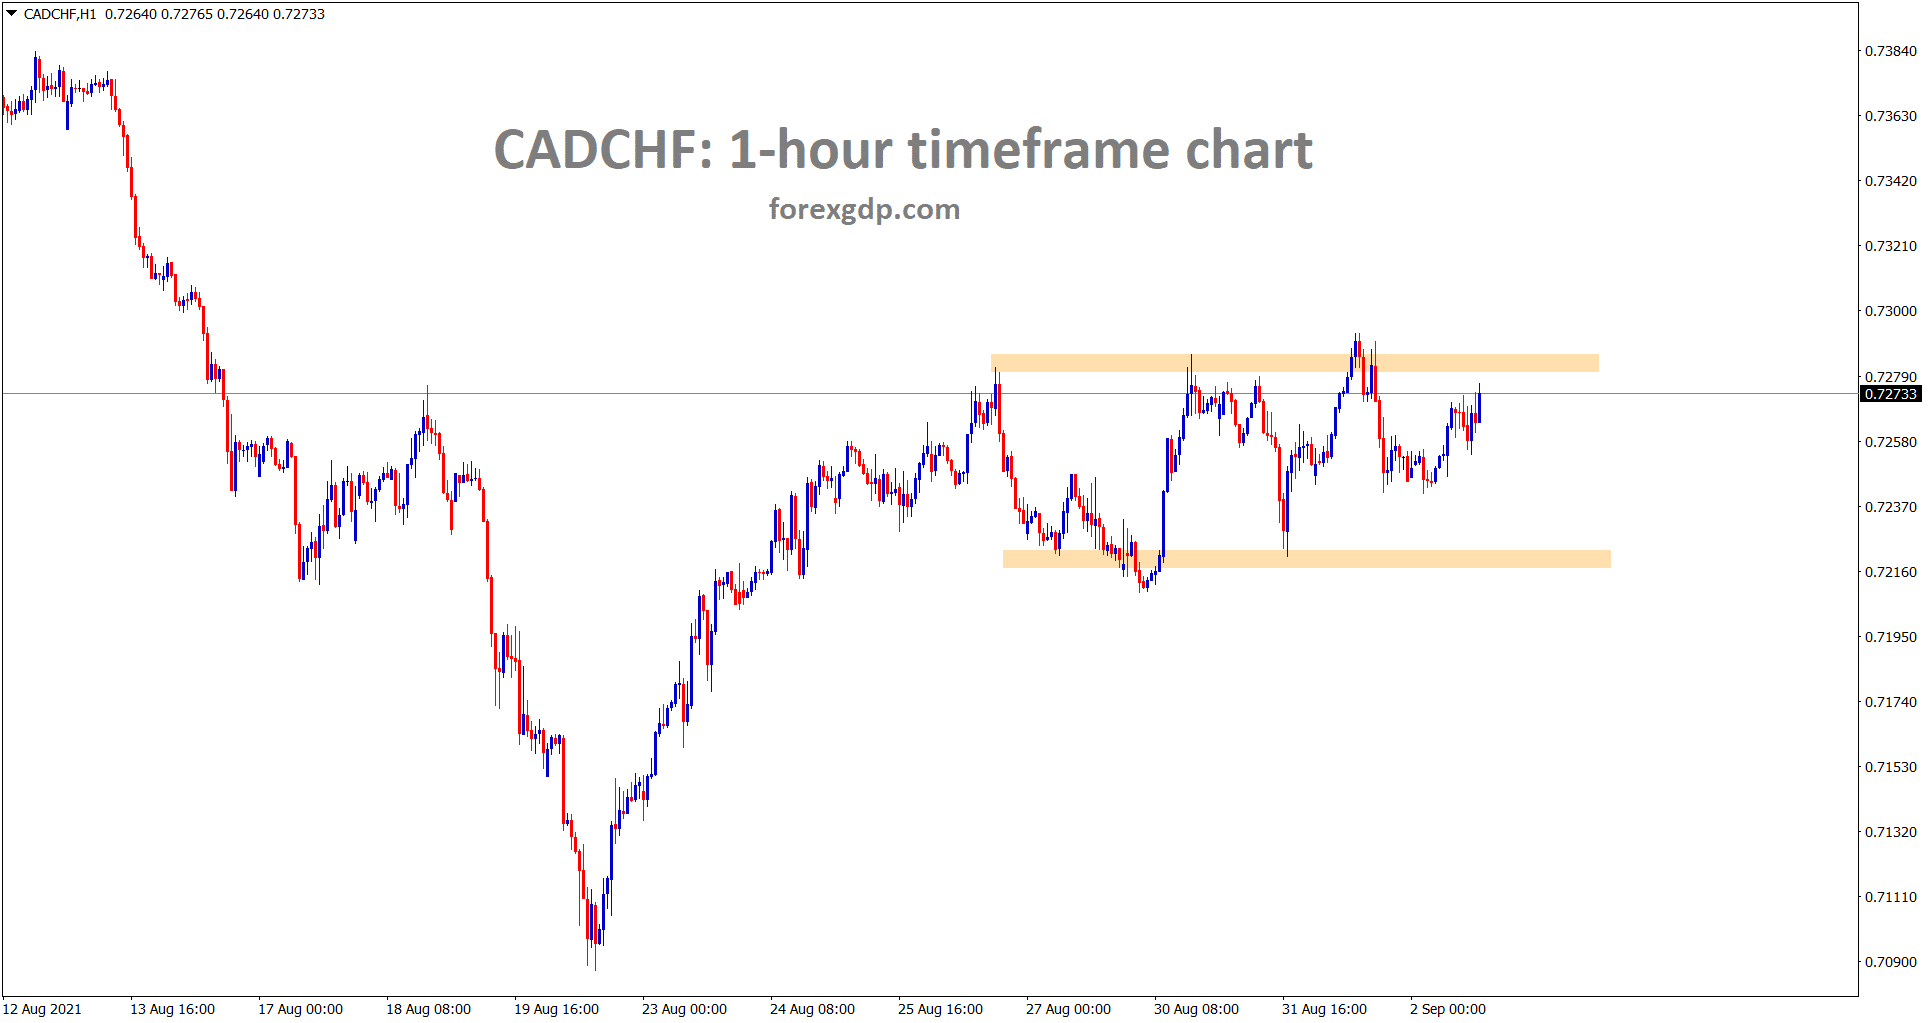 CADCHF is moving up and down between the support and resistance areas in the one hour timeframe